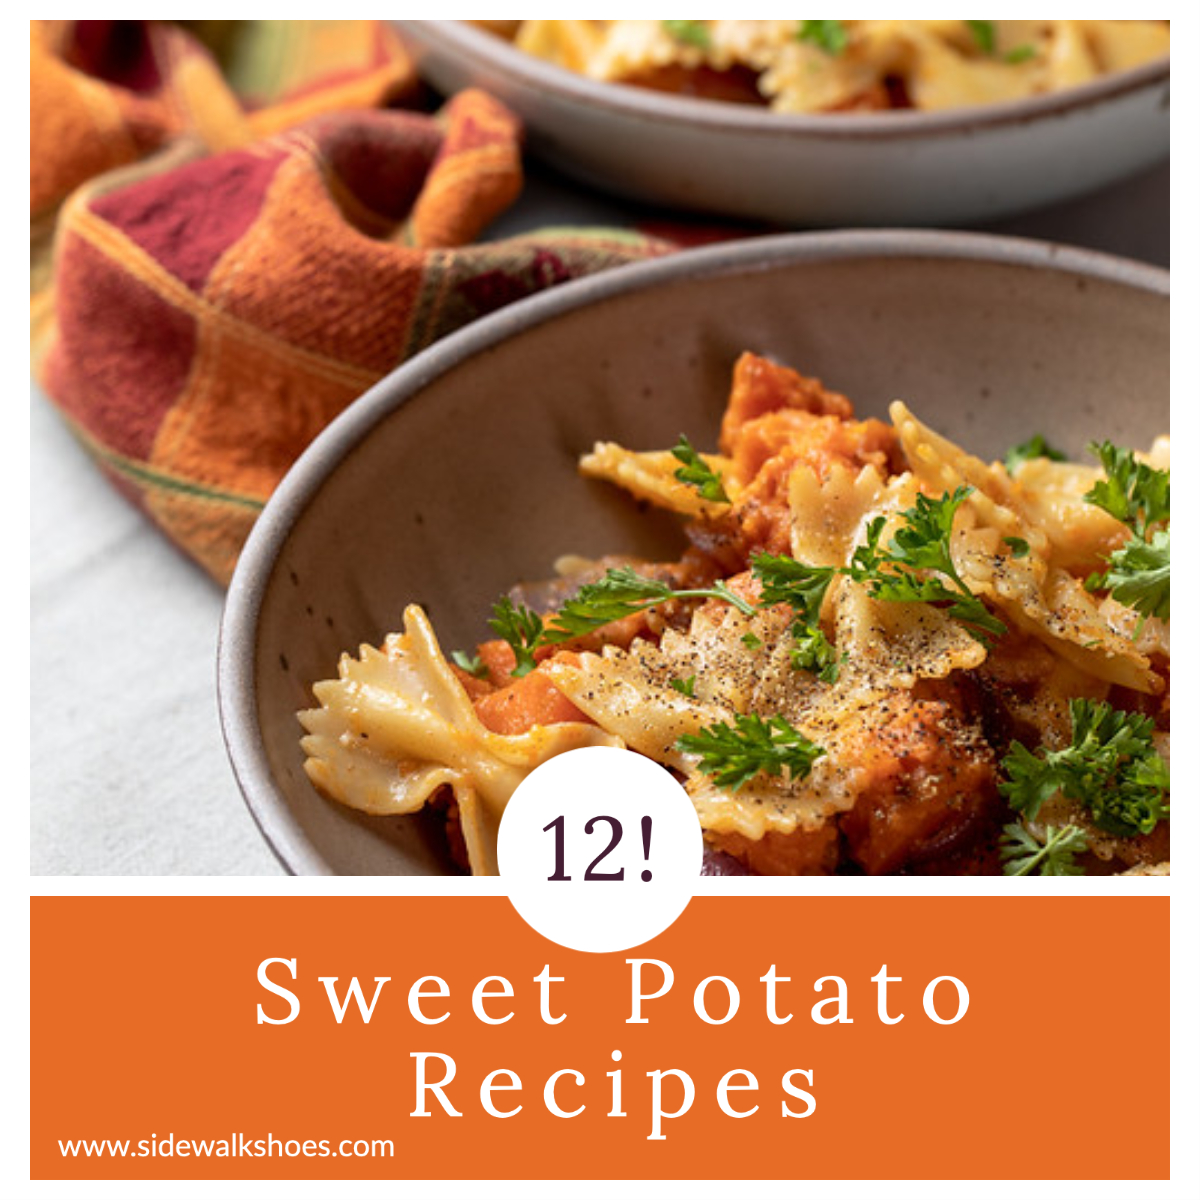 Sweet potatoes with pasta with a text overlay.